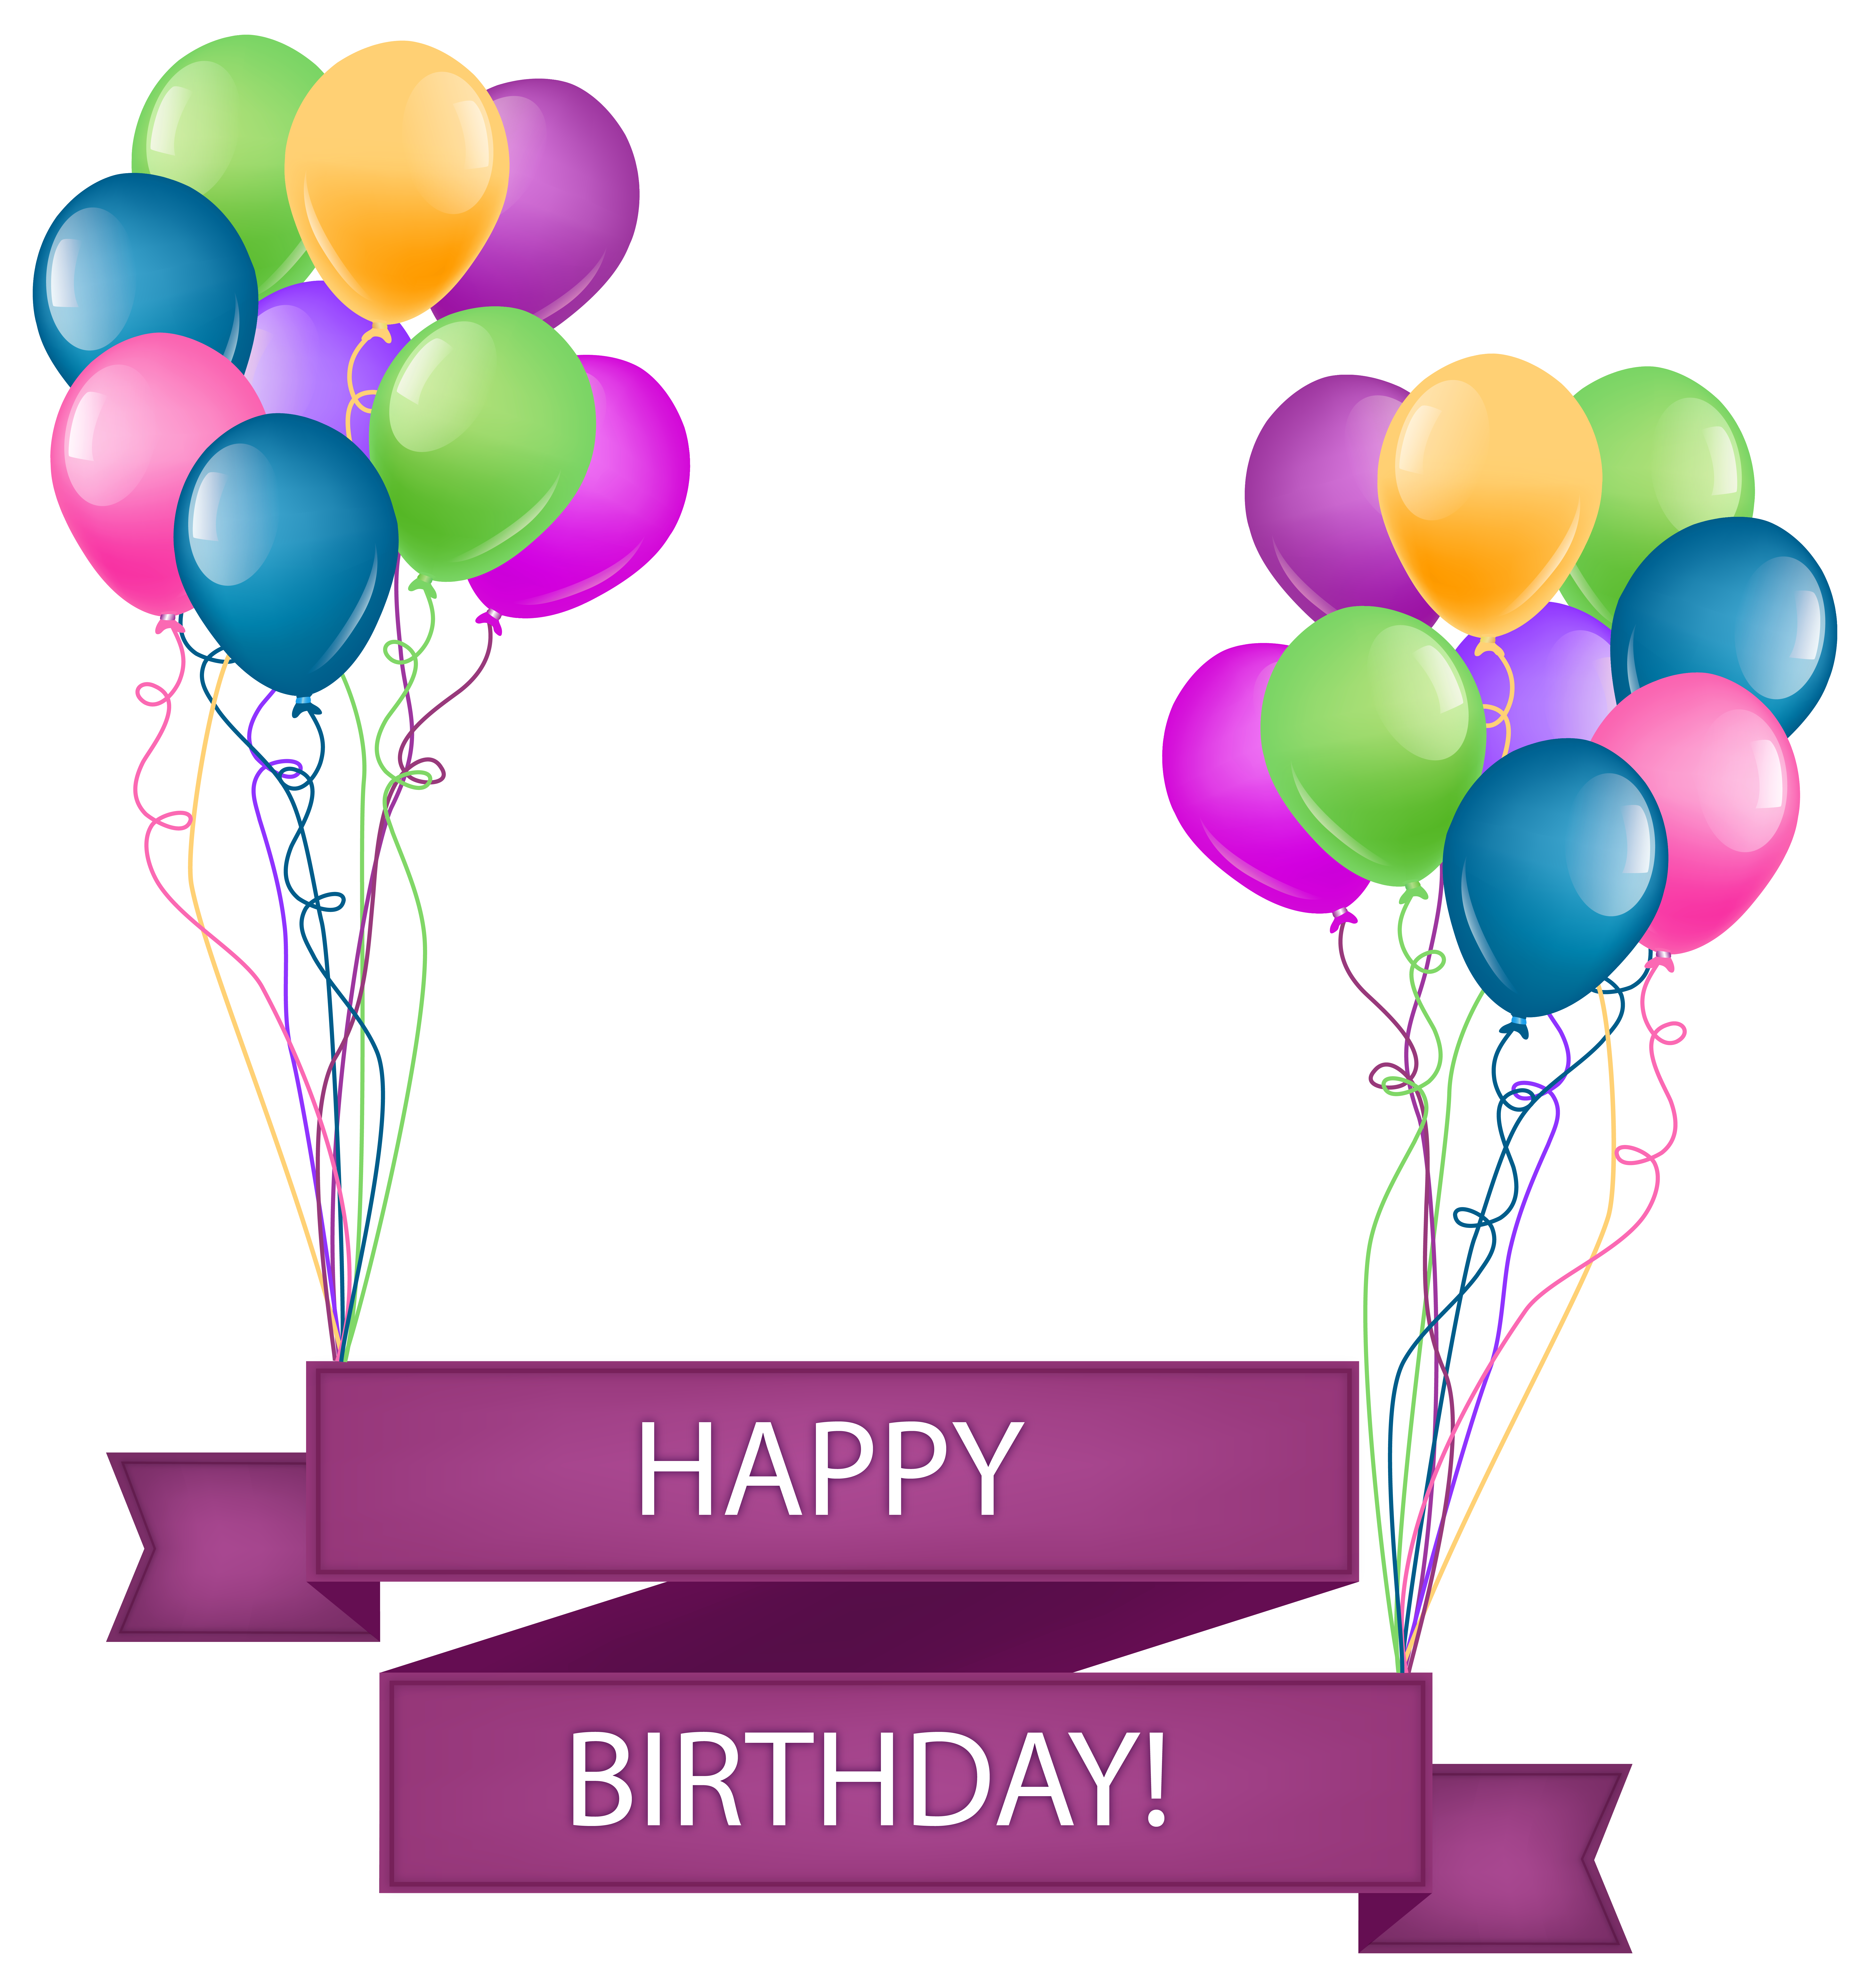 Happy birthday banner with. Congratulations clipart pink